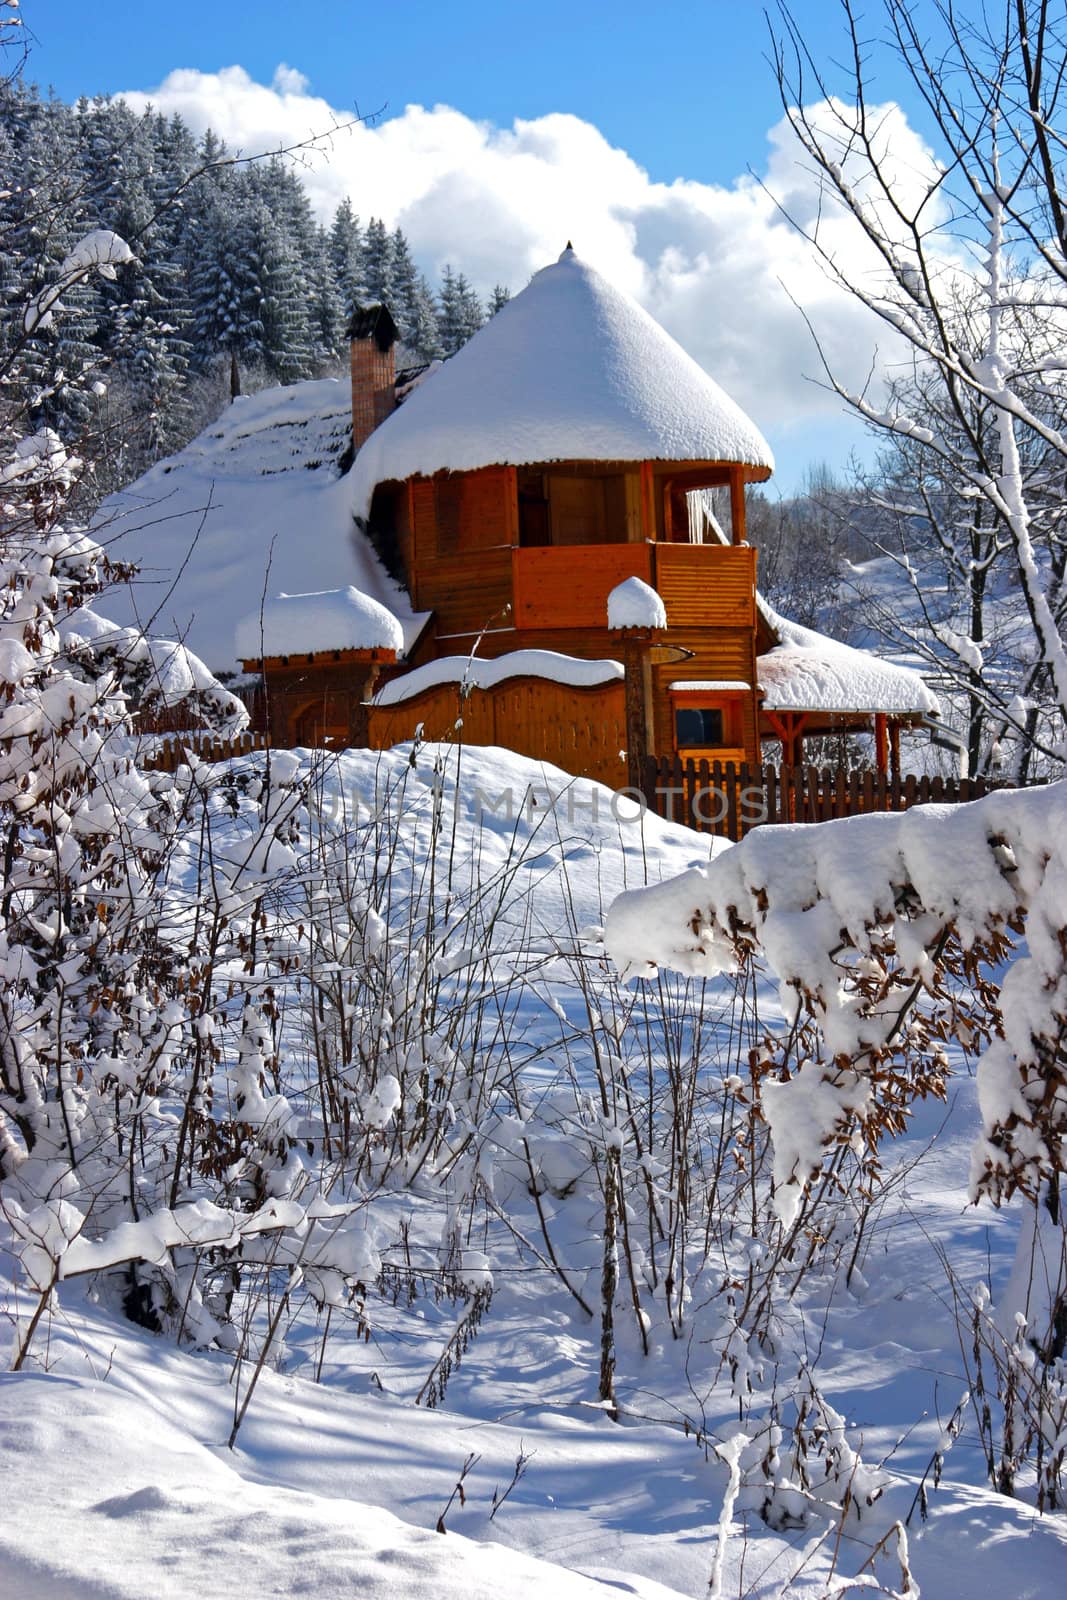 Chalet in the snow in Transylvania